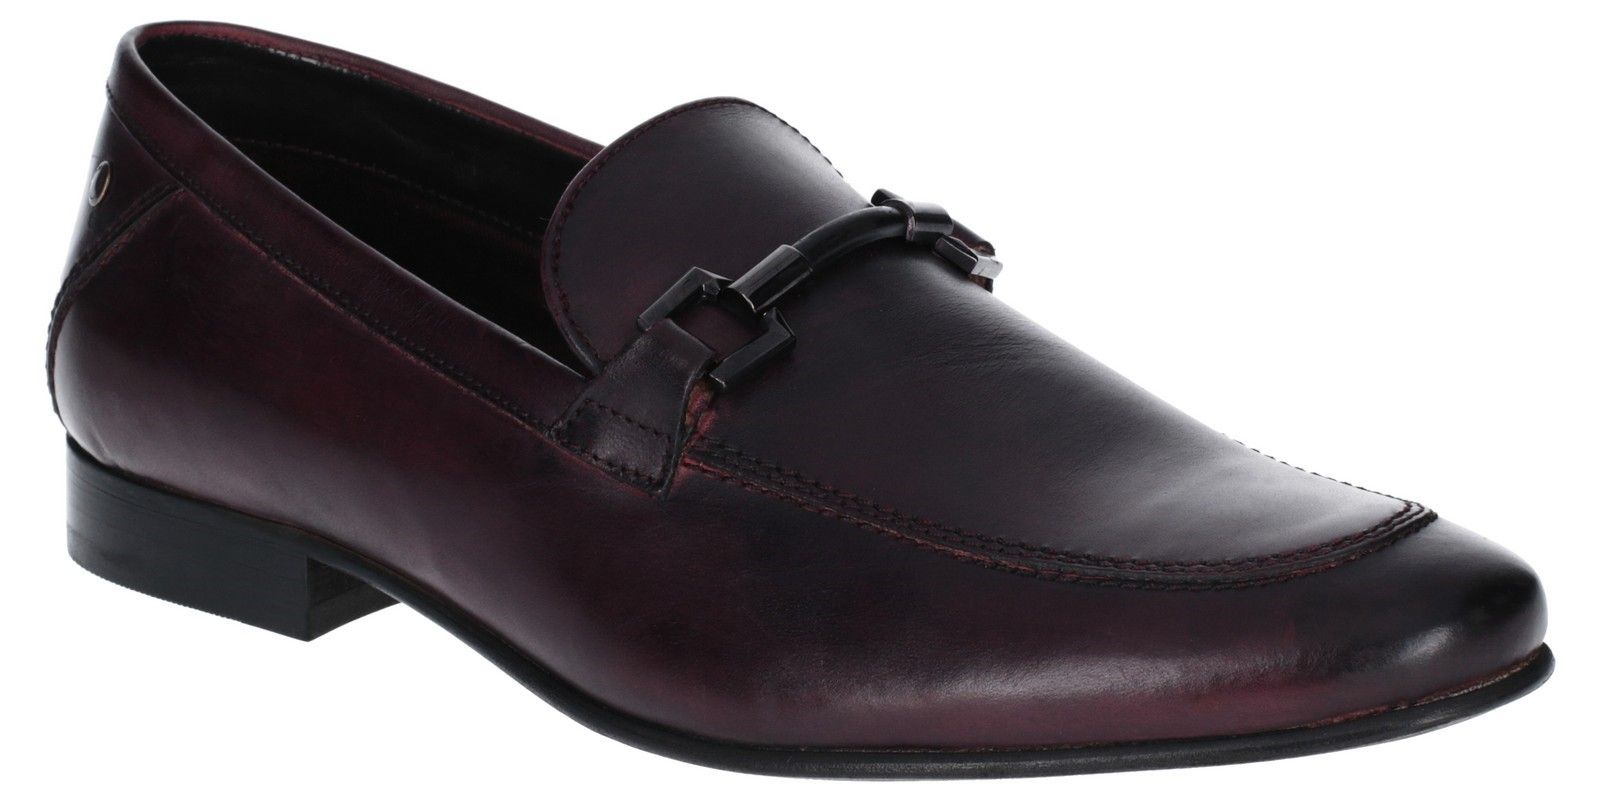 Step out in style. This Base London loafer has been constructed from quality leathers and features a horsebit buckle across the vamp. Slim and understated, Soprano will keep your enemies guessing and the ladies swooning. Horesbit Buckle Details. 
Formal Styling.